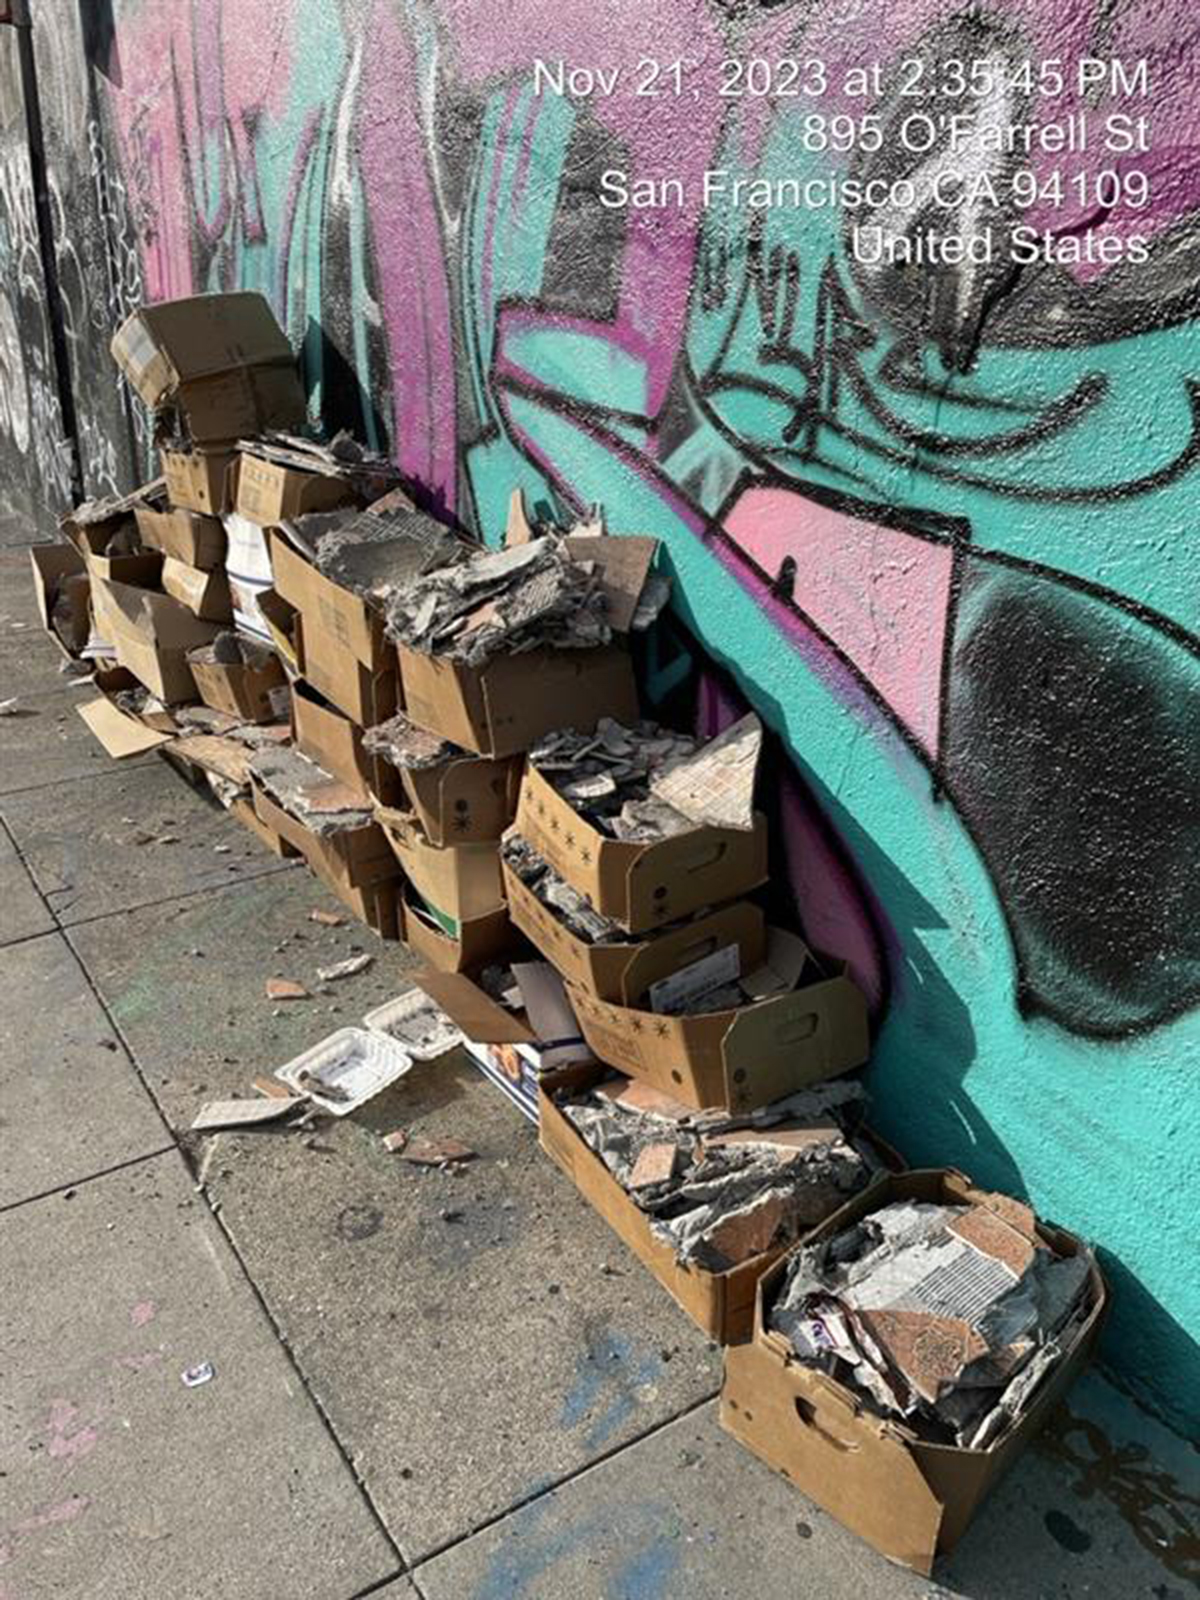 A pile of cardboard boxes filled with debris against a graffiti-covered wall on a sidewalk, timestamped Nov 21, 2023, in San Francisco.